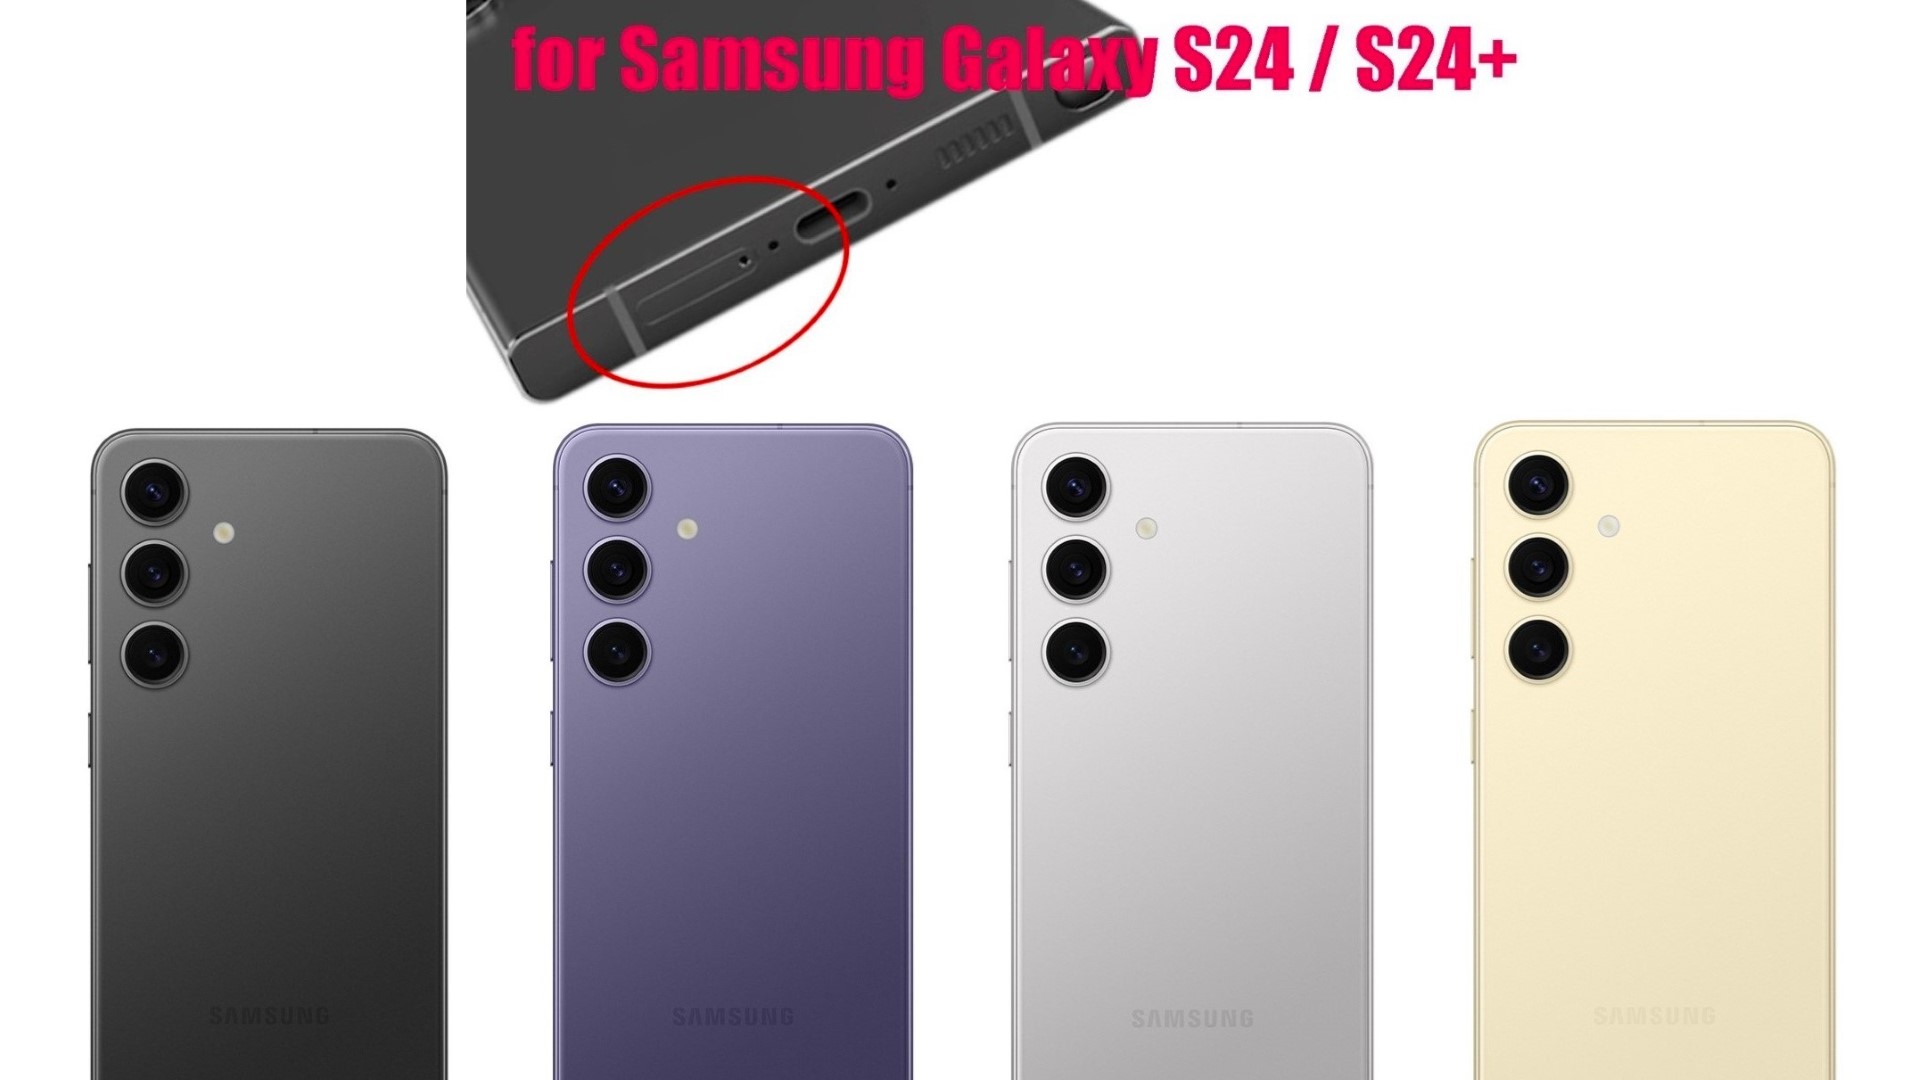 Samsung Galaxy S24, S24+, S24 Ultra images leaked in all colors